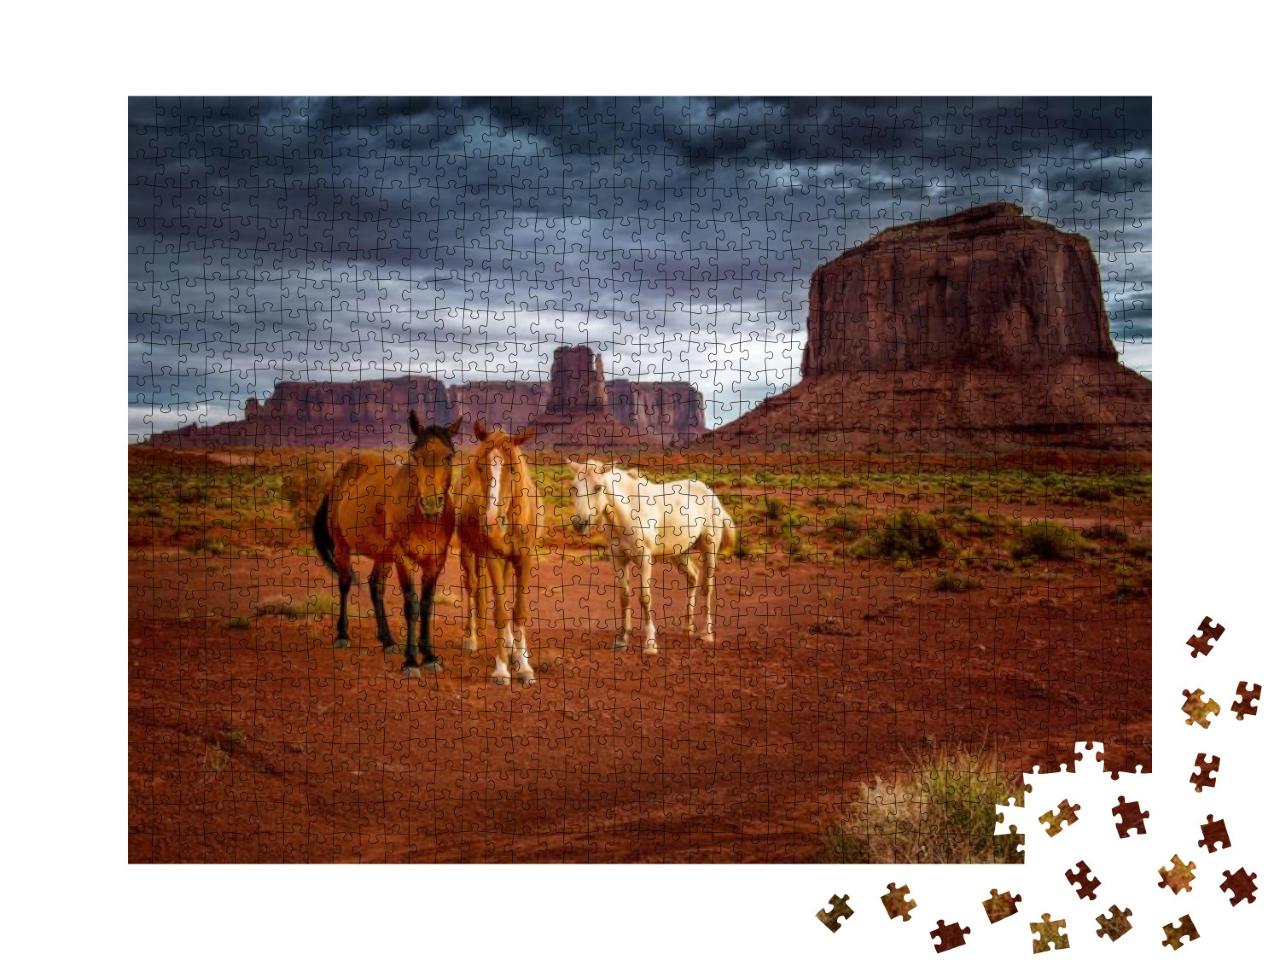 Wild Horses in the Desert of Monument Valley in Arizona... Jigsaw Puzzle with 1000 pieces